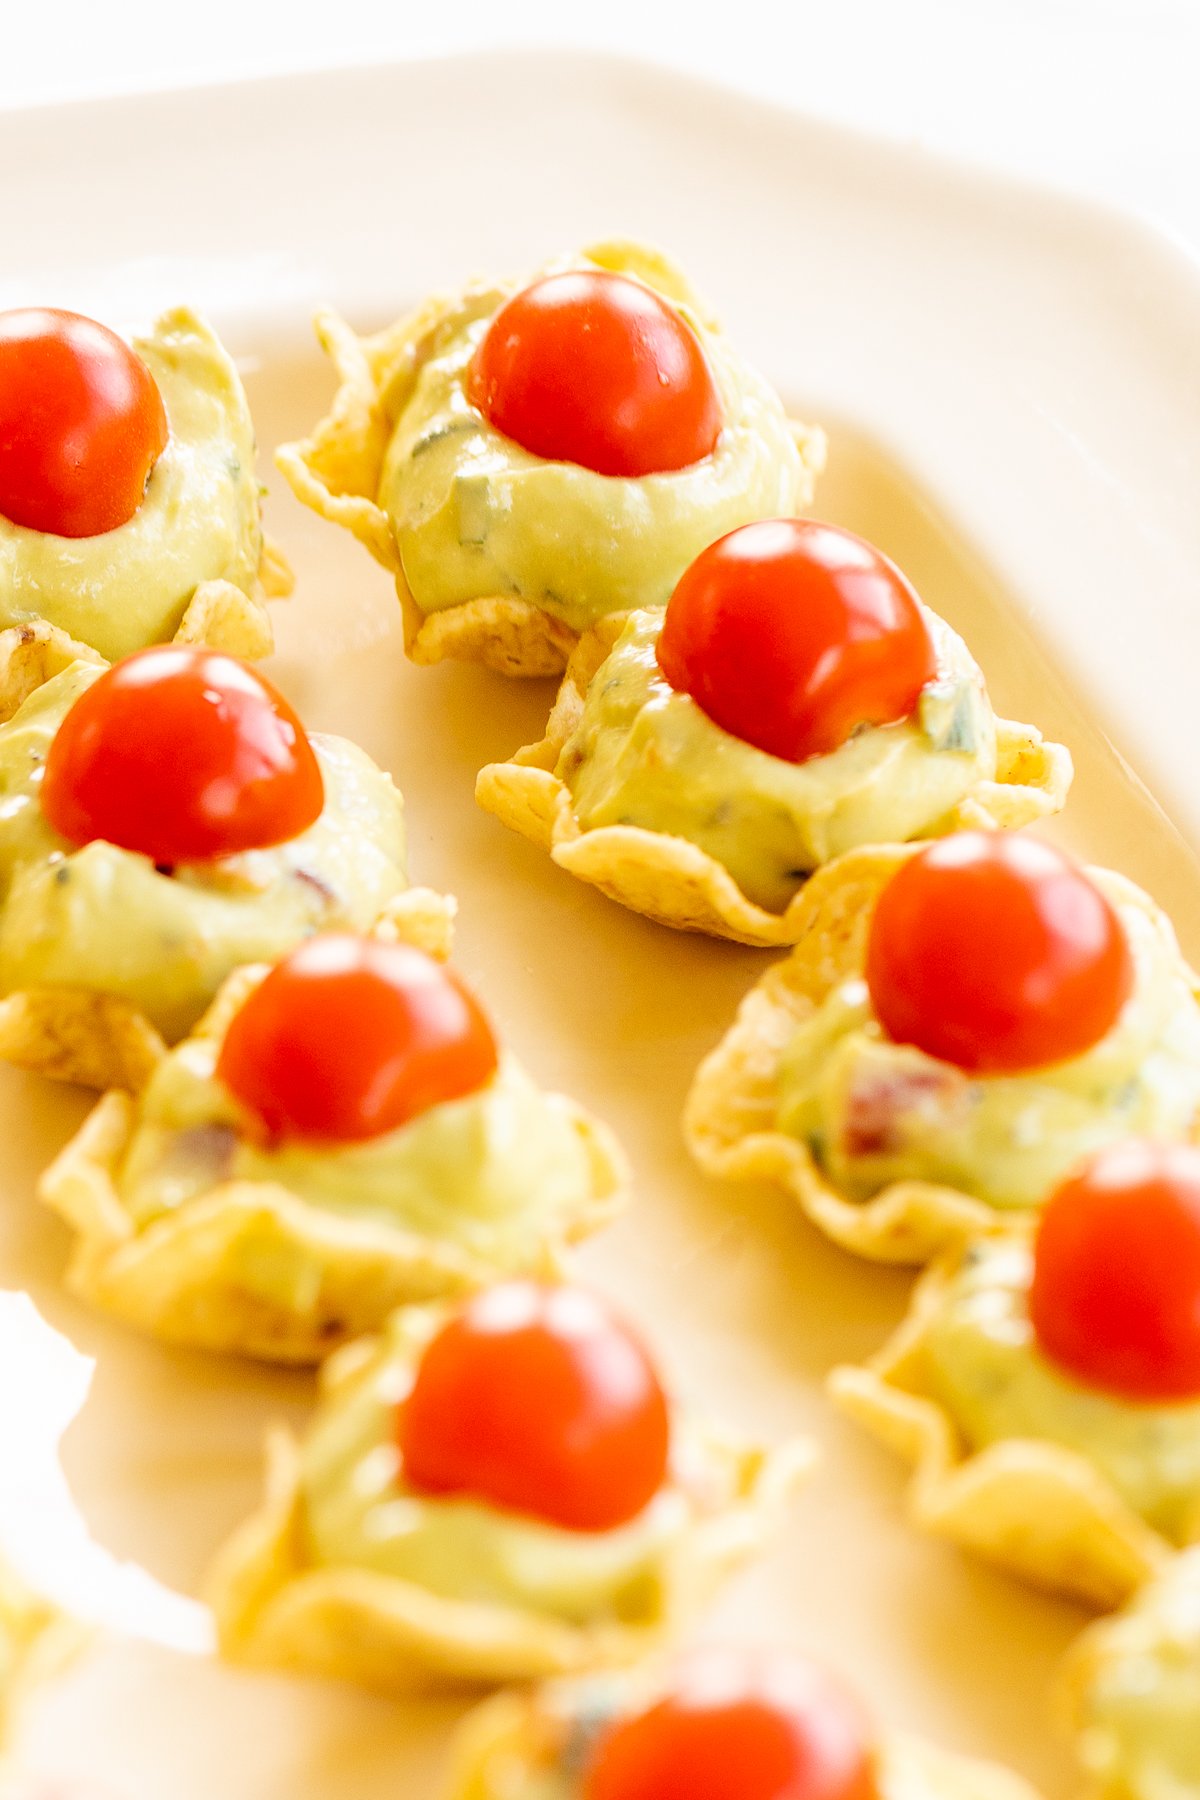 Guacamole bites with tomatoes on a plate.